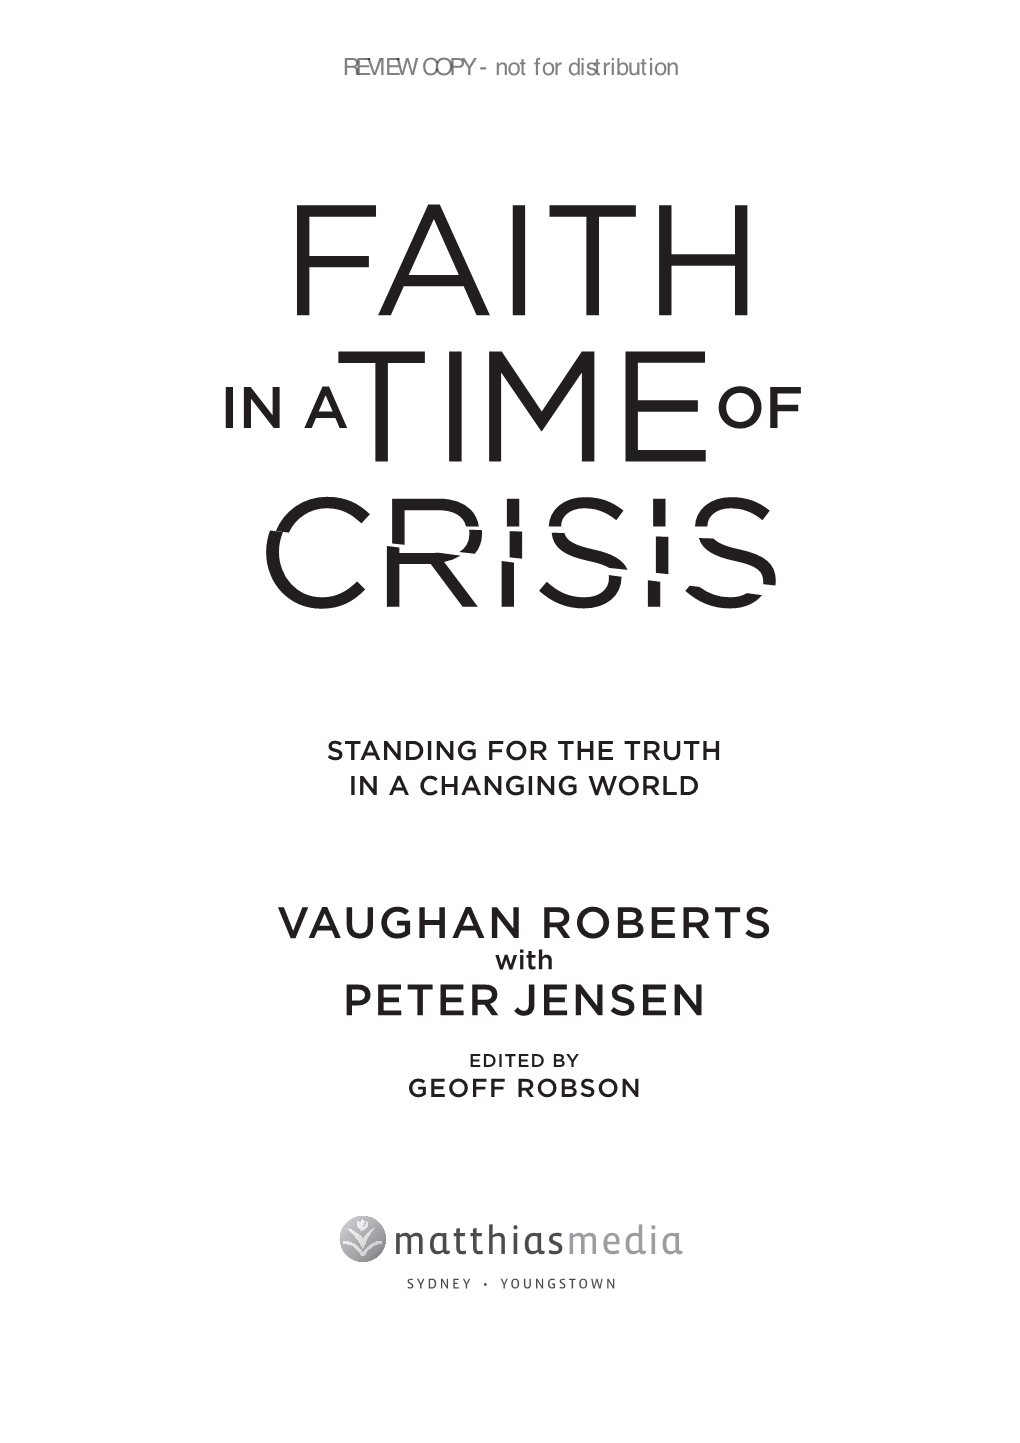 Faith in a Time of Crisis Review Copy